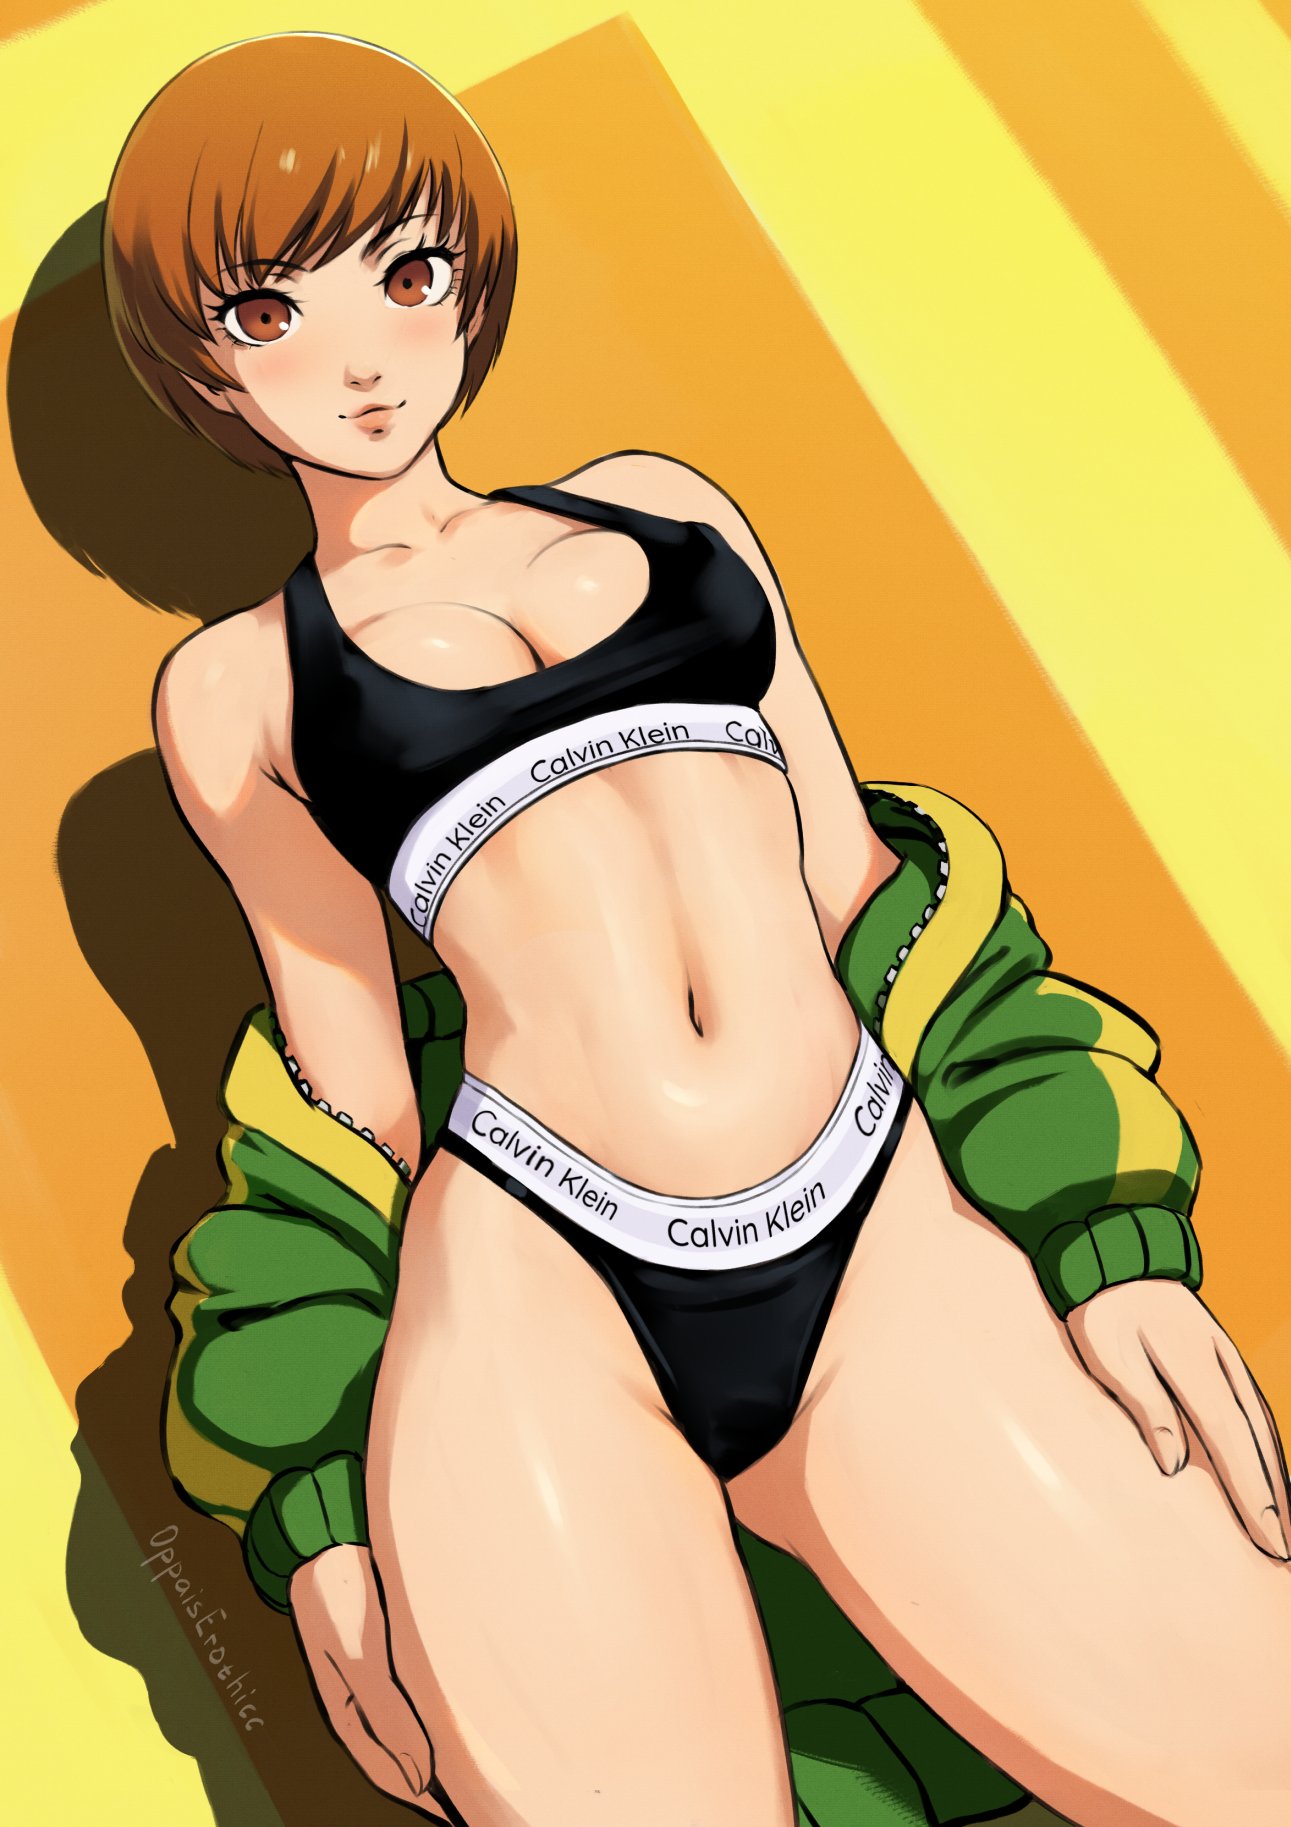 Anime 1291x1827 Chie Satonaka Persona 4 anime girls video game girls cleavage open jacket brunette brown eyes belly underwear OppaisErothicc portrait display thighs belly button looking at viewer smiling shadow Calvin Klein Persona series